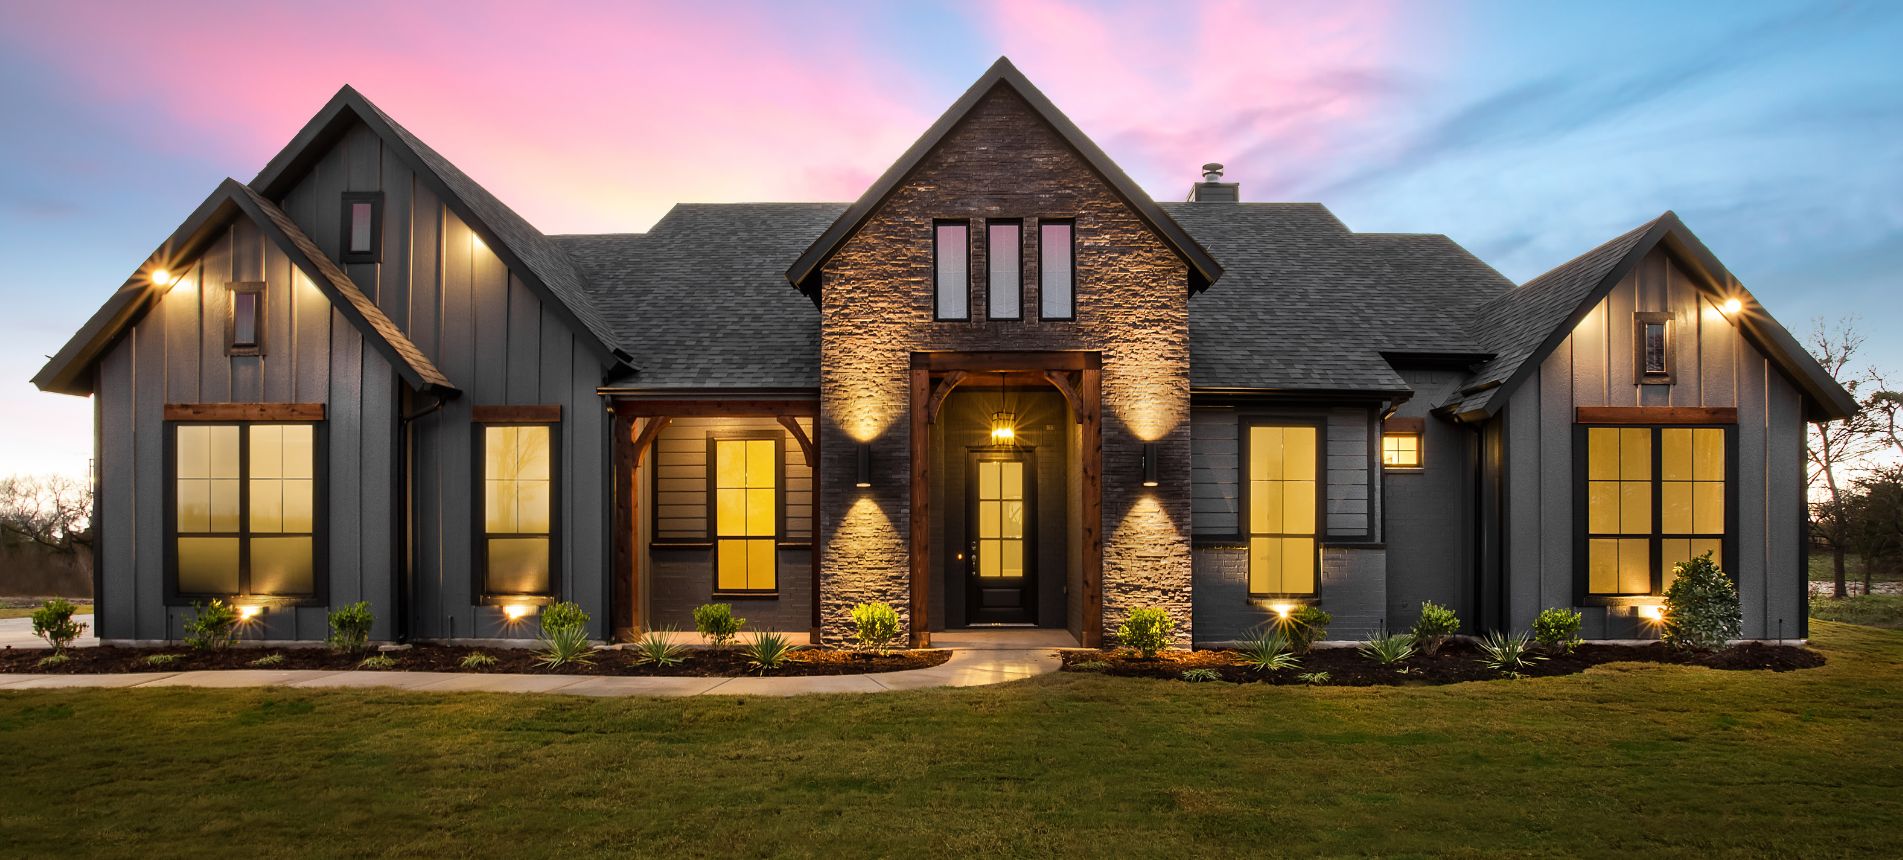 Why You Should Install Outdoor Lighting for Your Home